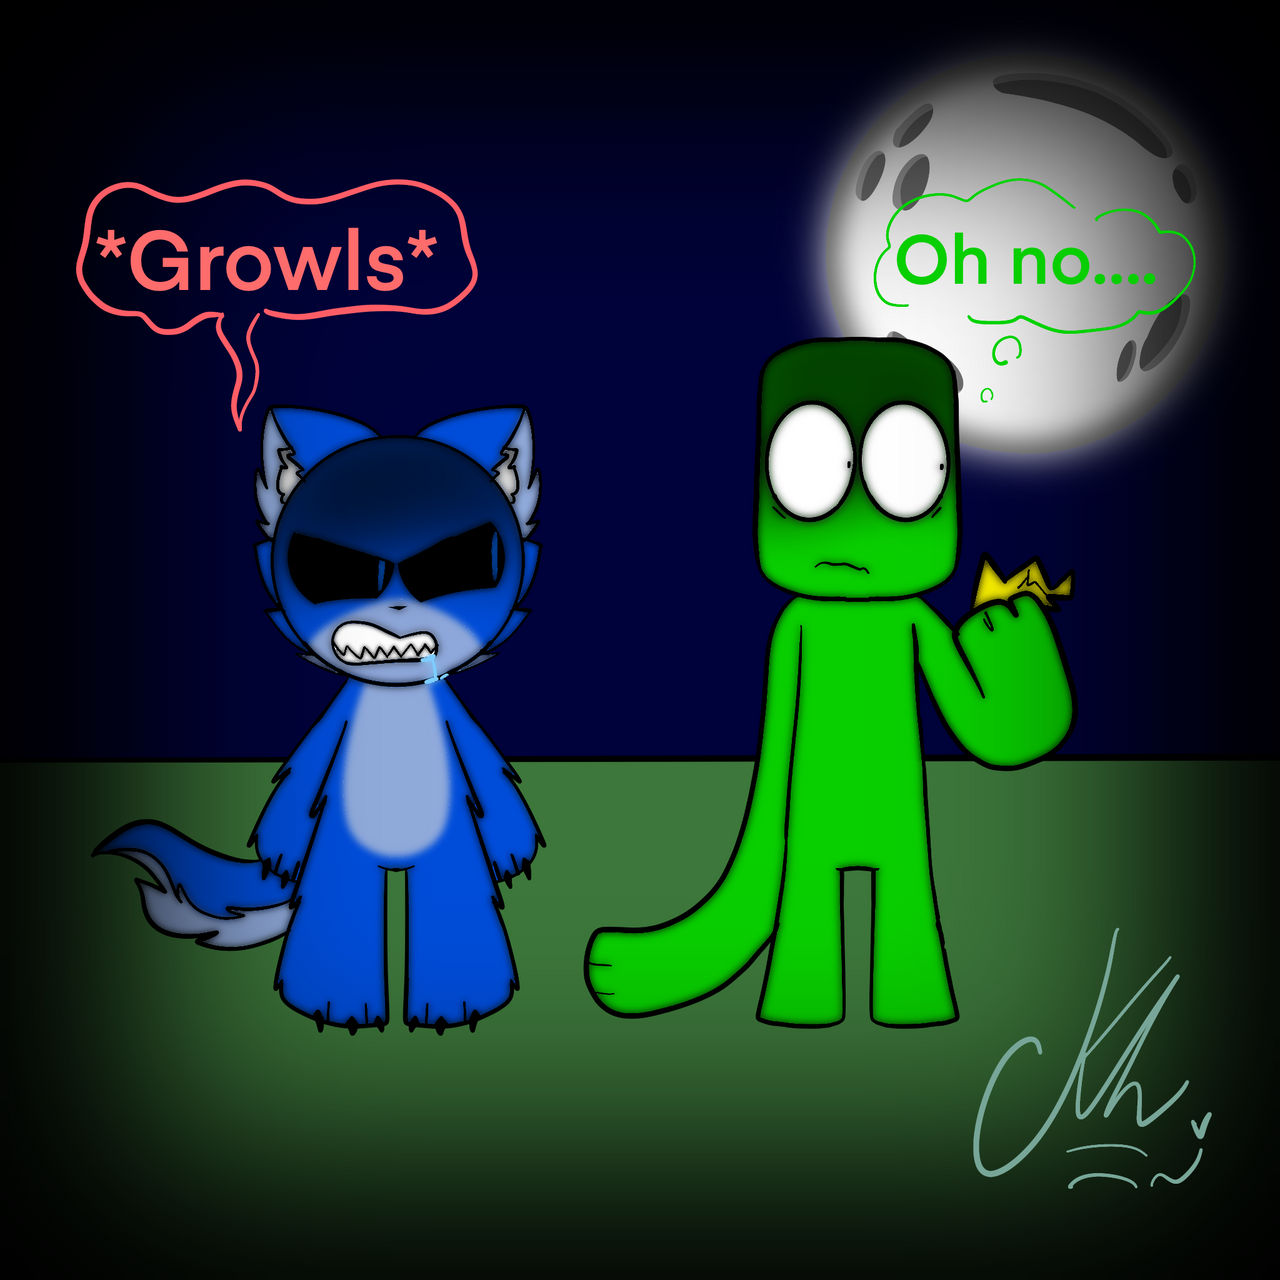 Blue and green kids by KumaDraws334 on DeviantArt